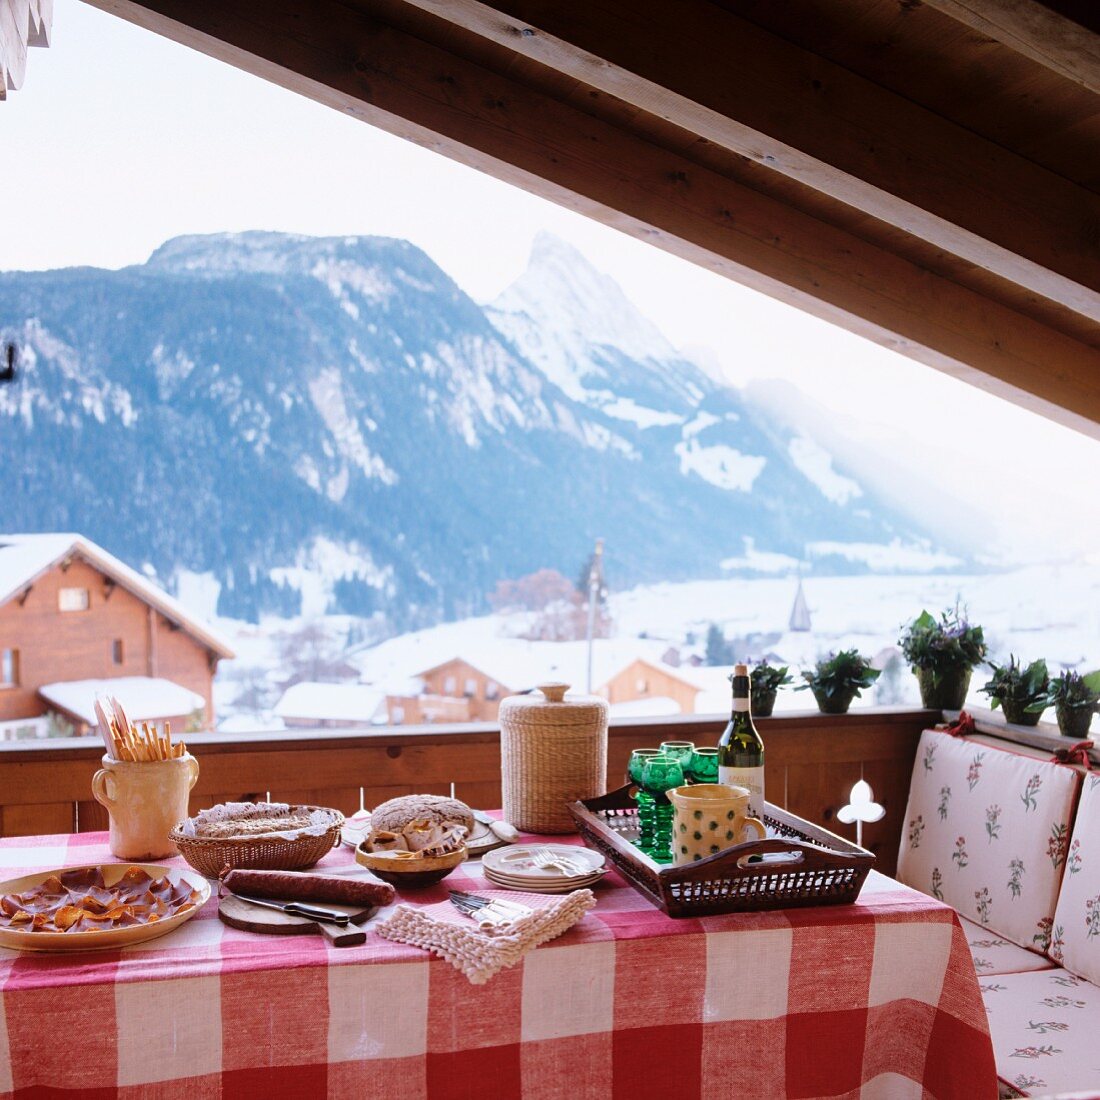 Table set for simple lunch in loggia of chalet with view of snowy mountain landscape